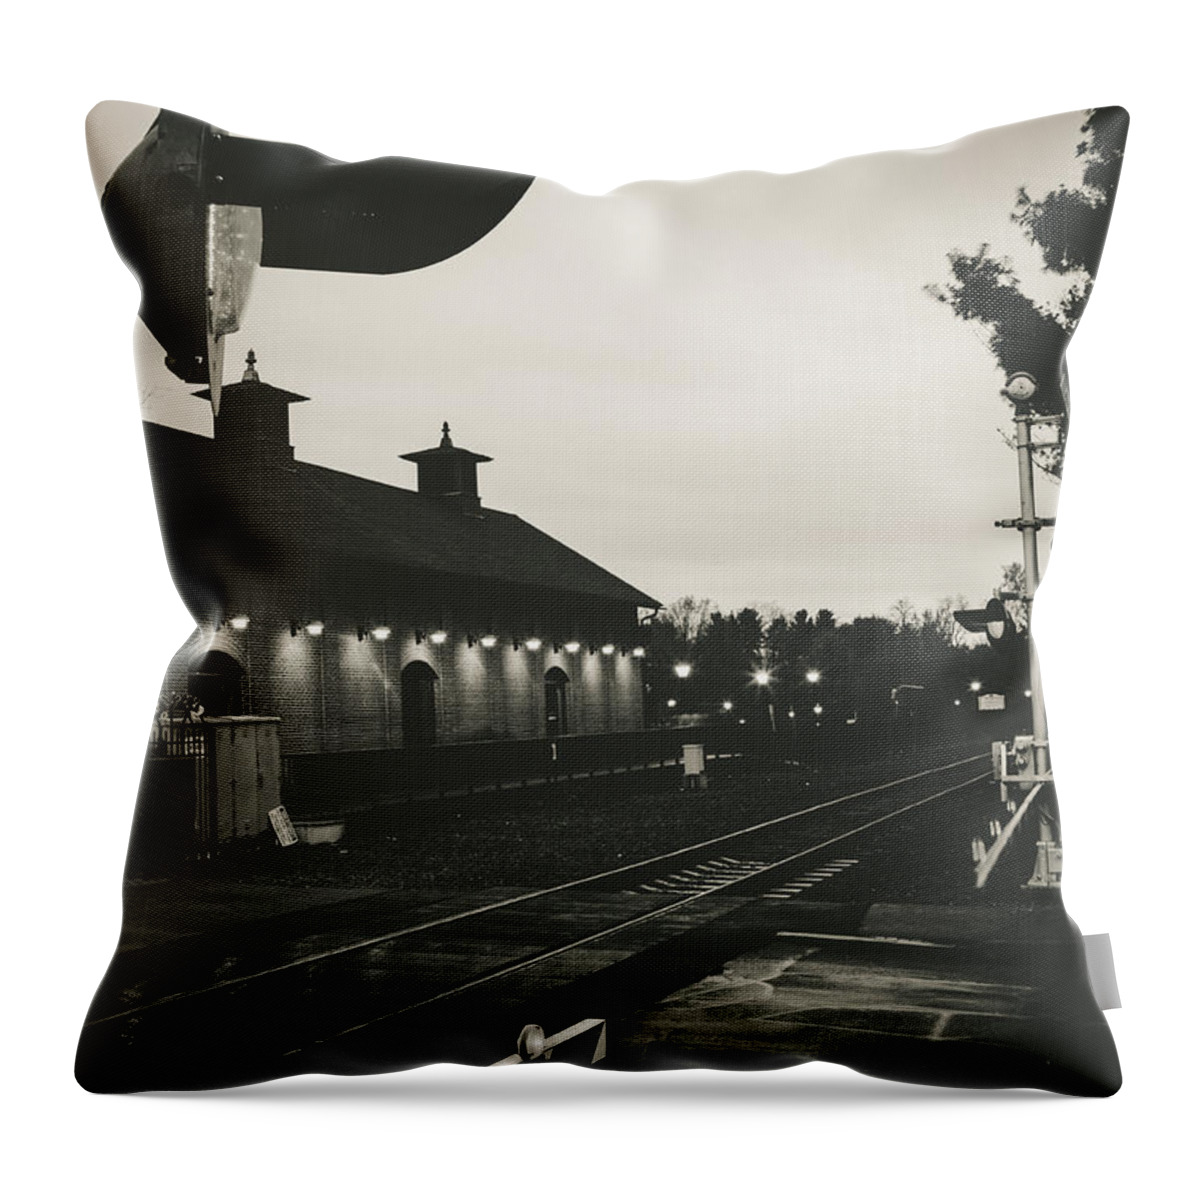 Alone Throw Pillow featuring the photograph Gritty Railroad Crossing by Kyle Lee